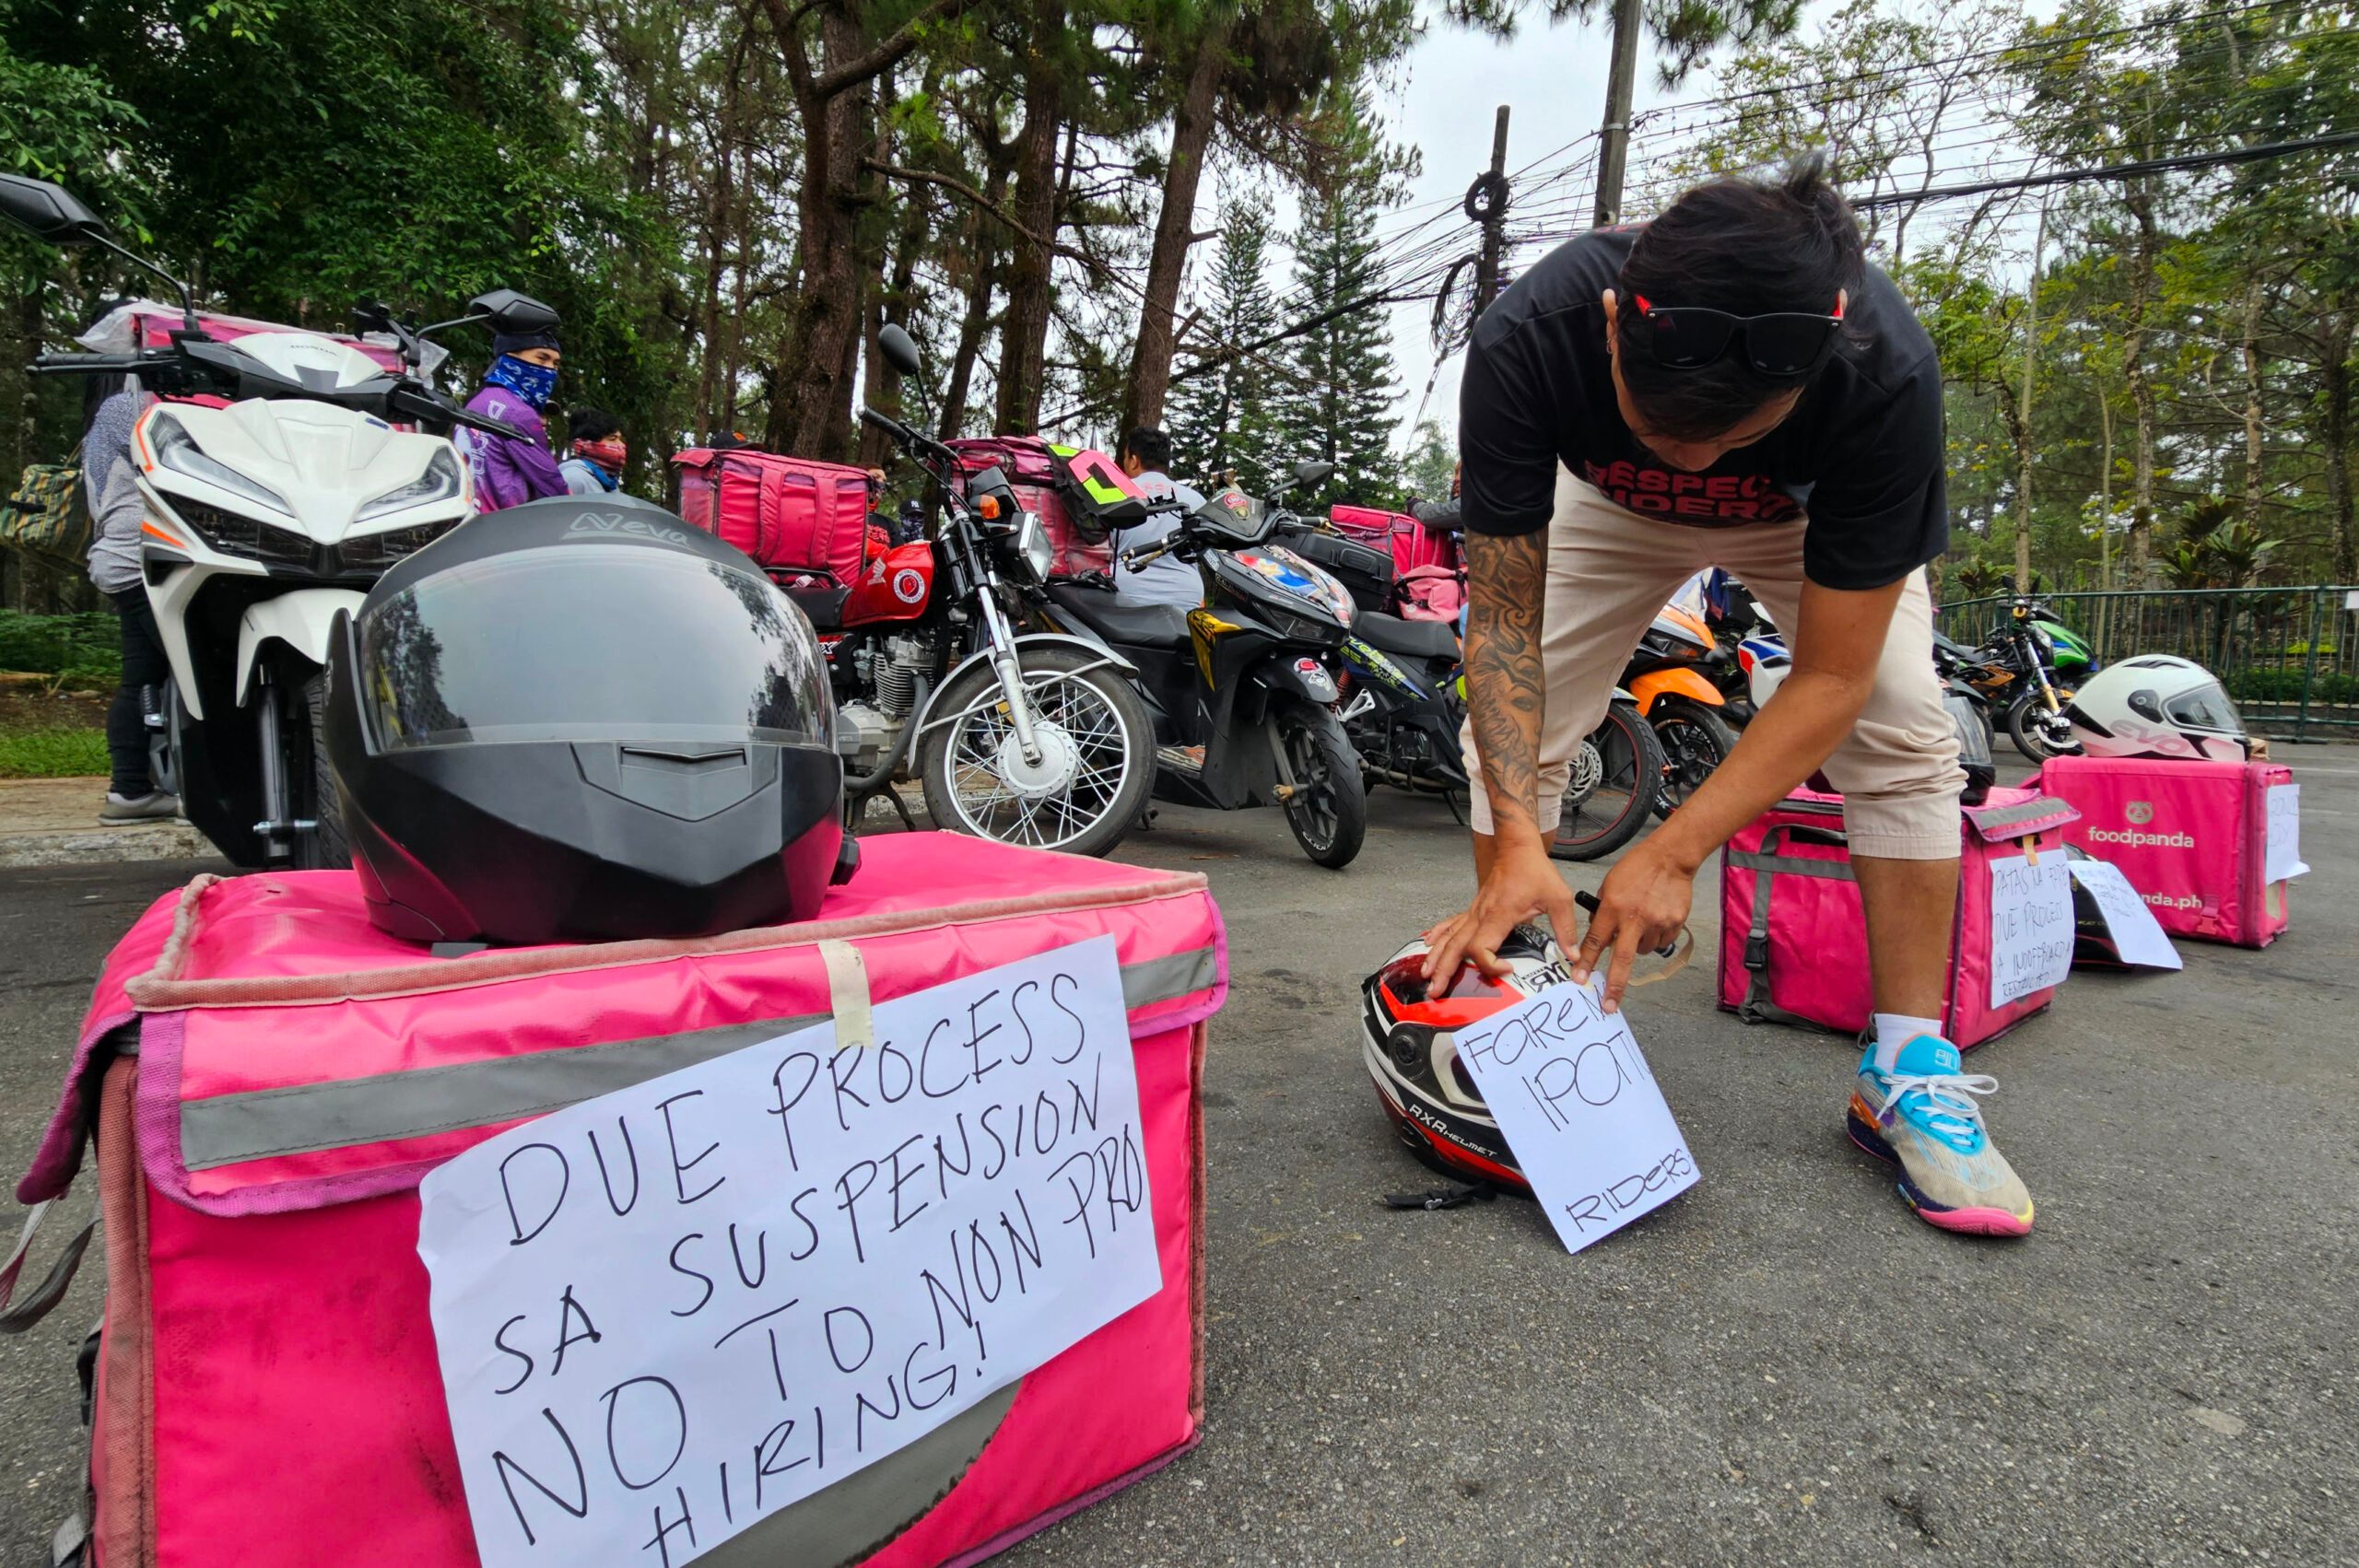 Baguio Foodpanda riders fight for better working conditions 